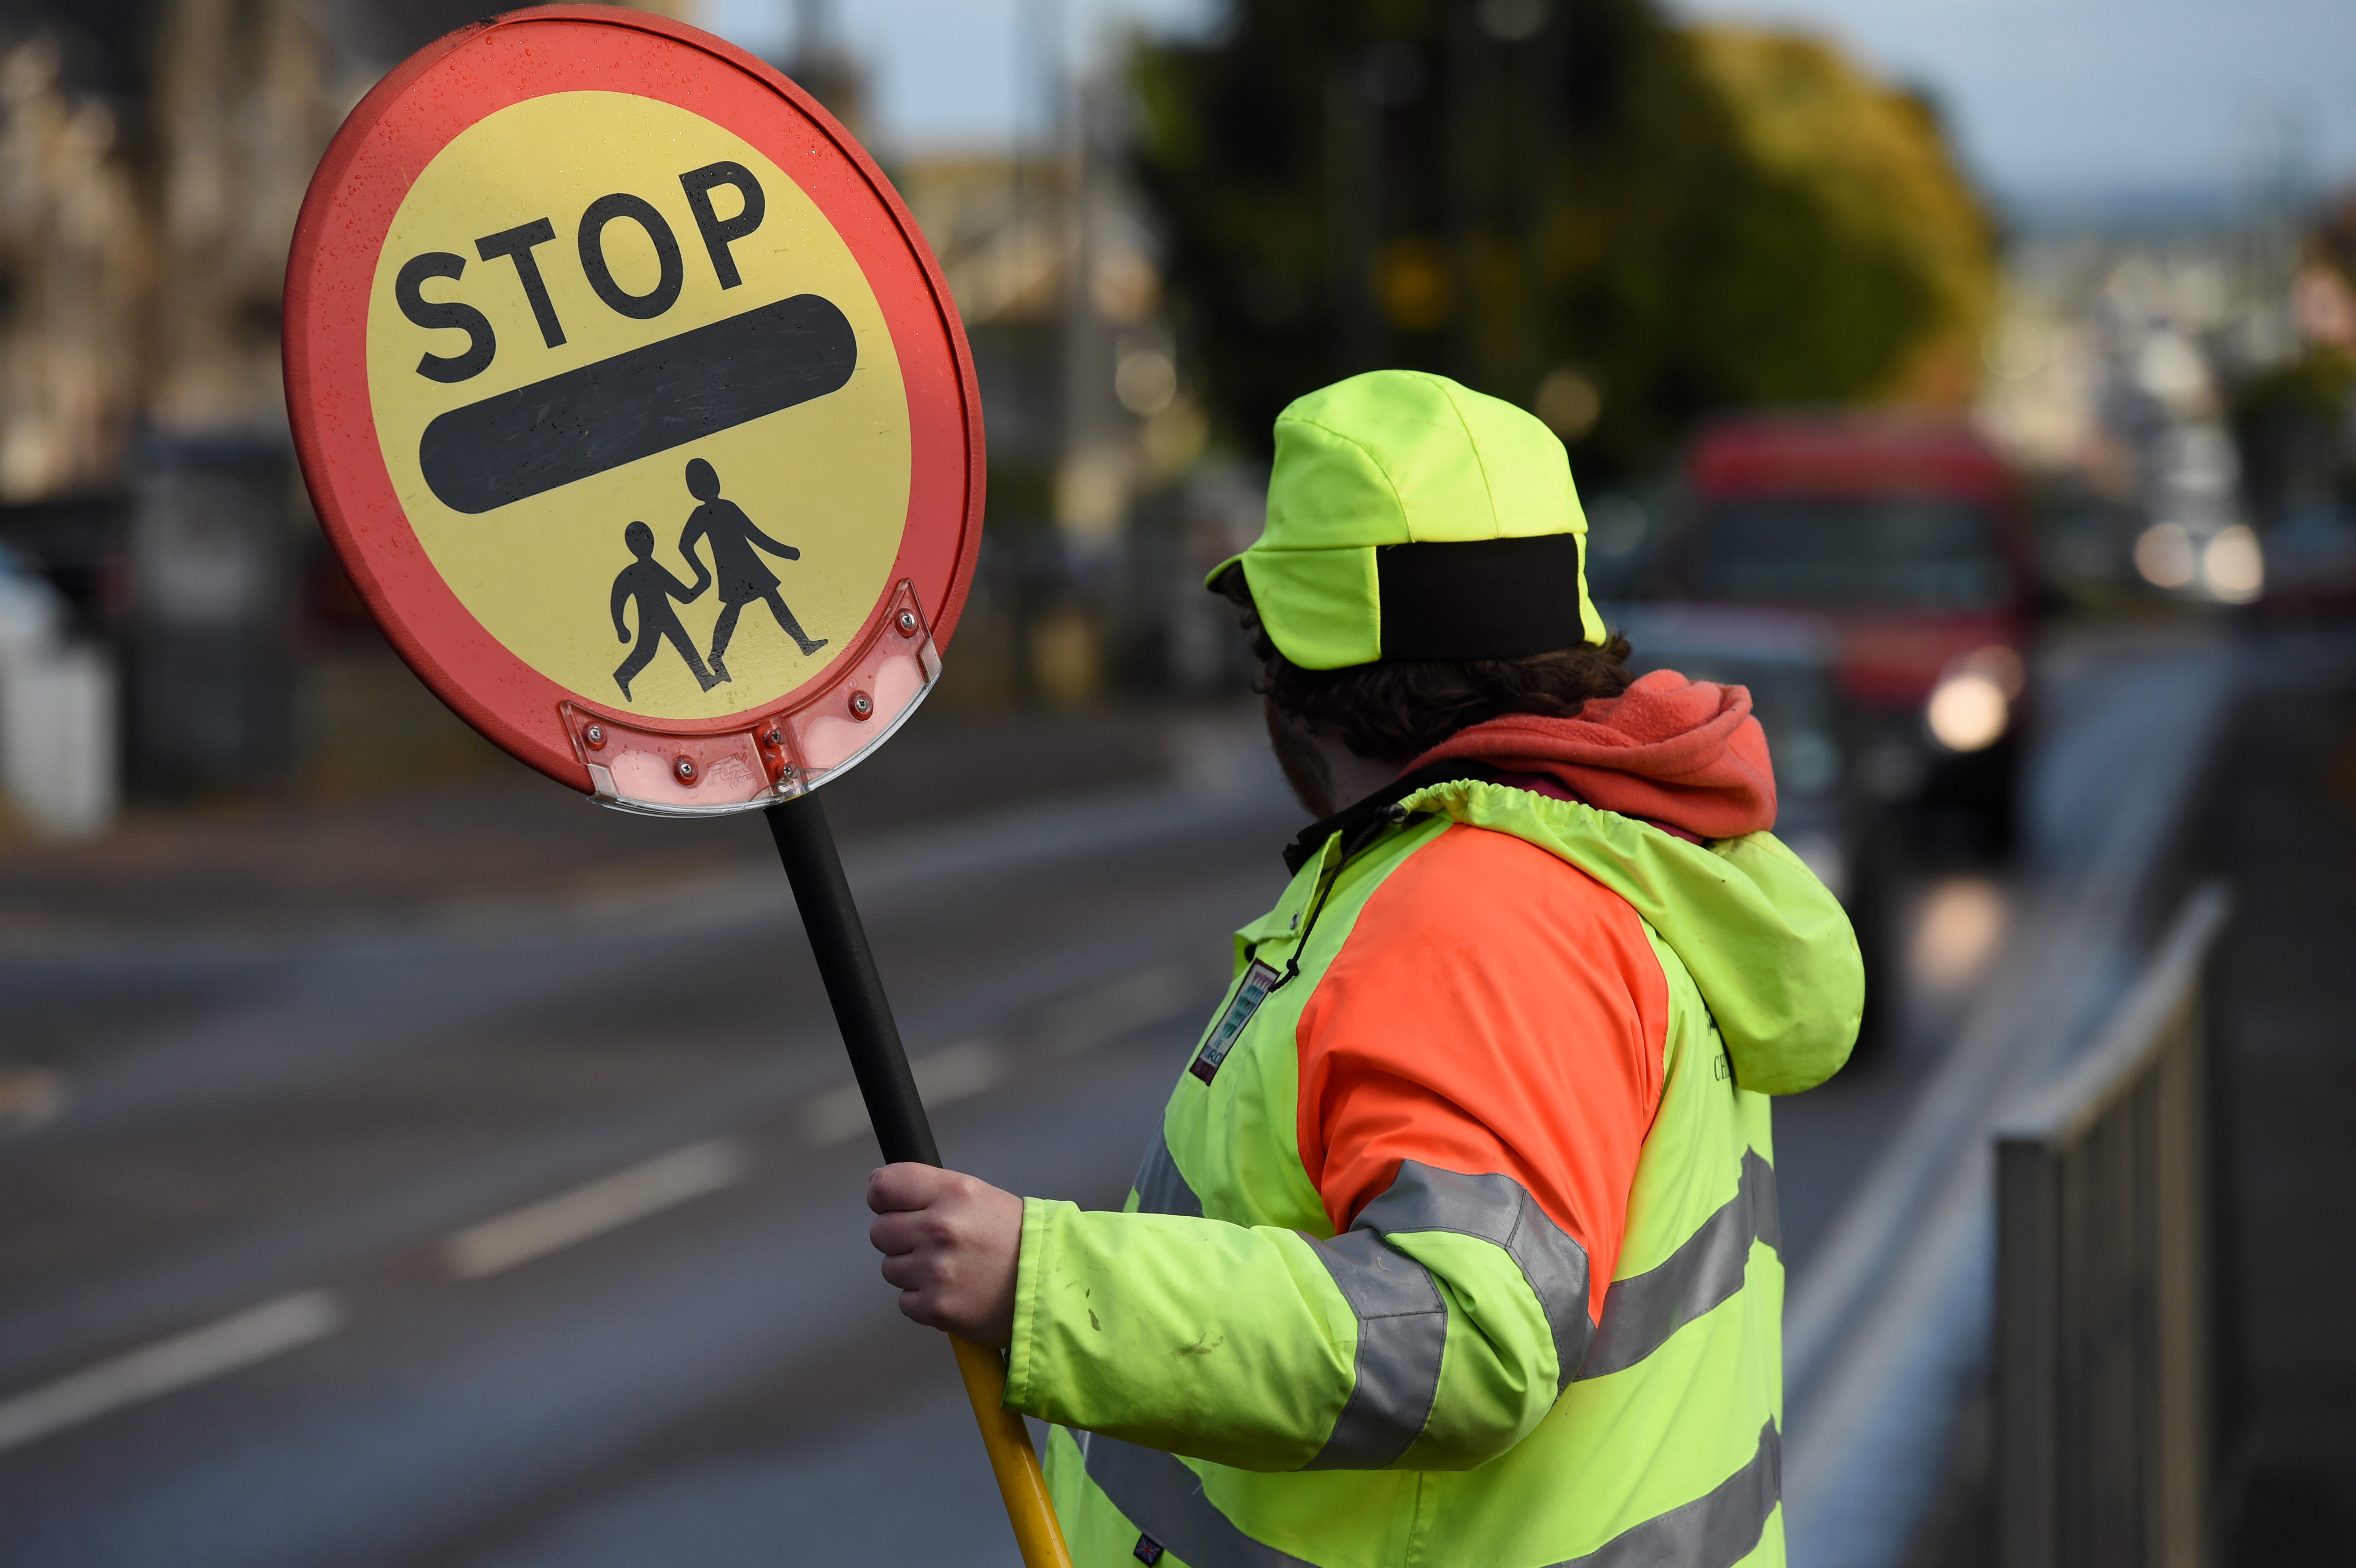 Moray Council is withdrawing all school crossing patrollers.